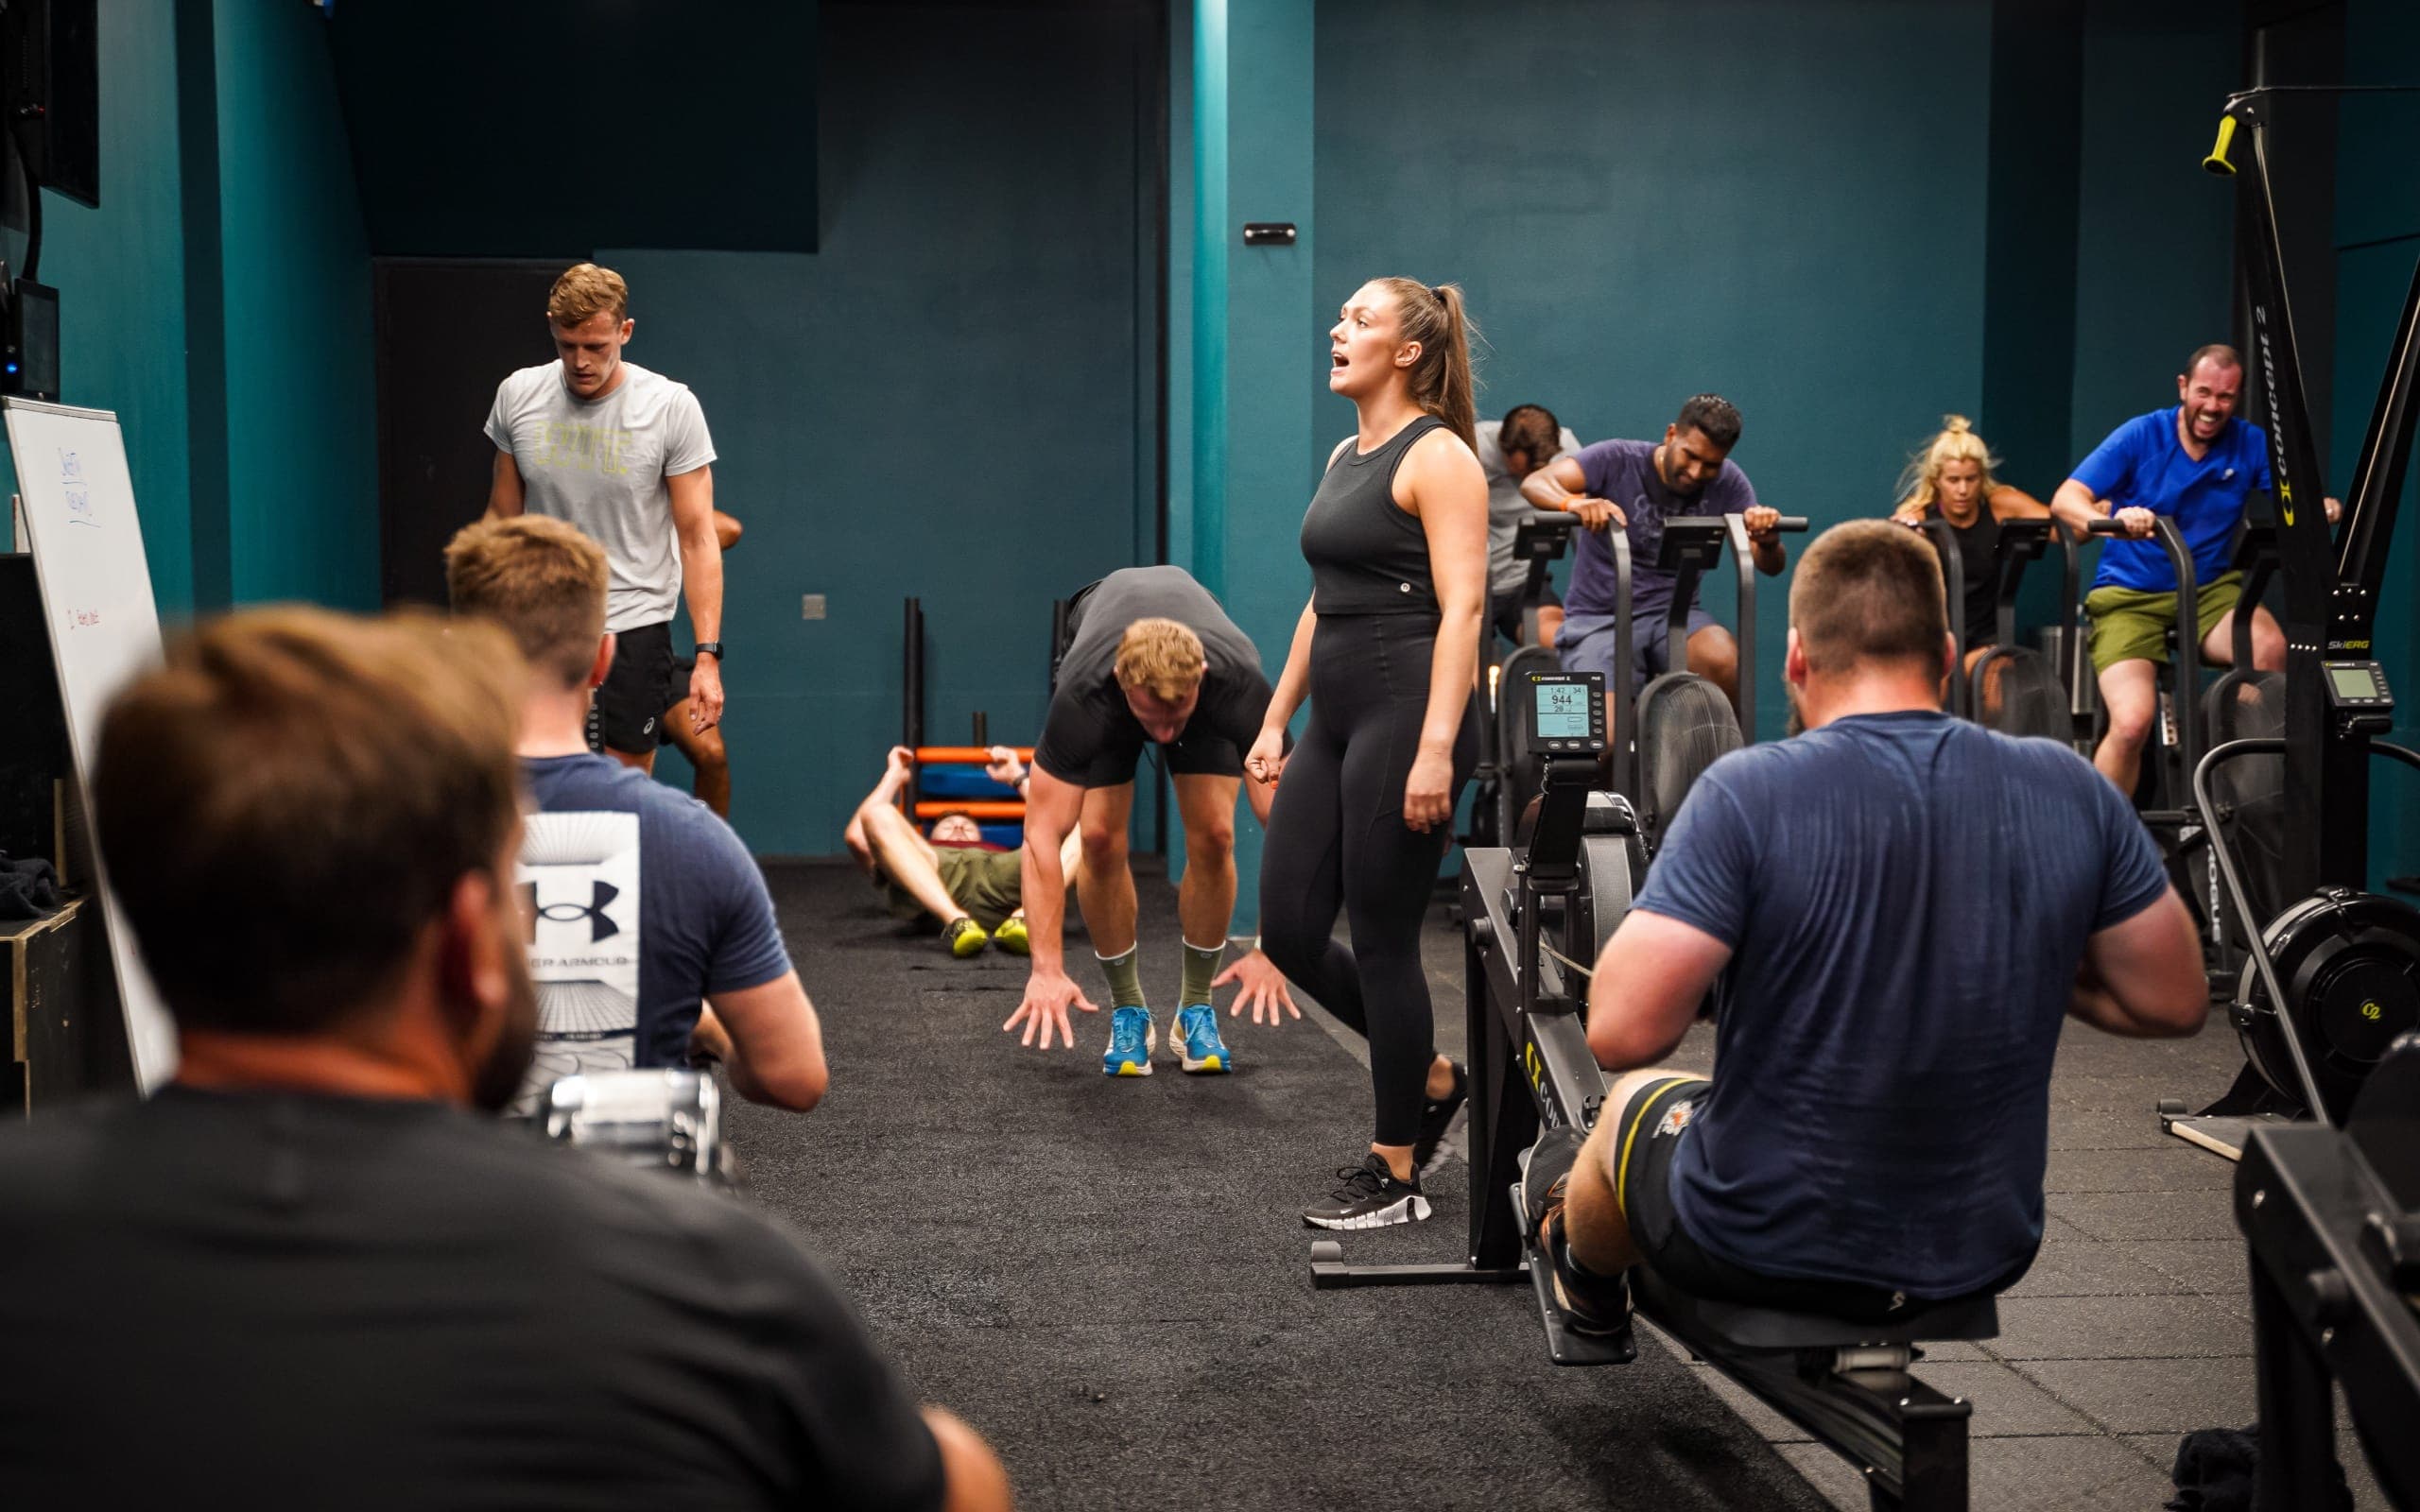 Small Group Personal Training Classes - Gym Classes - Foundry Personal Training Gyms